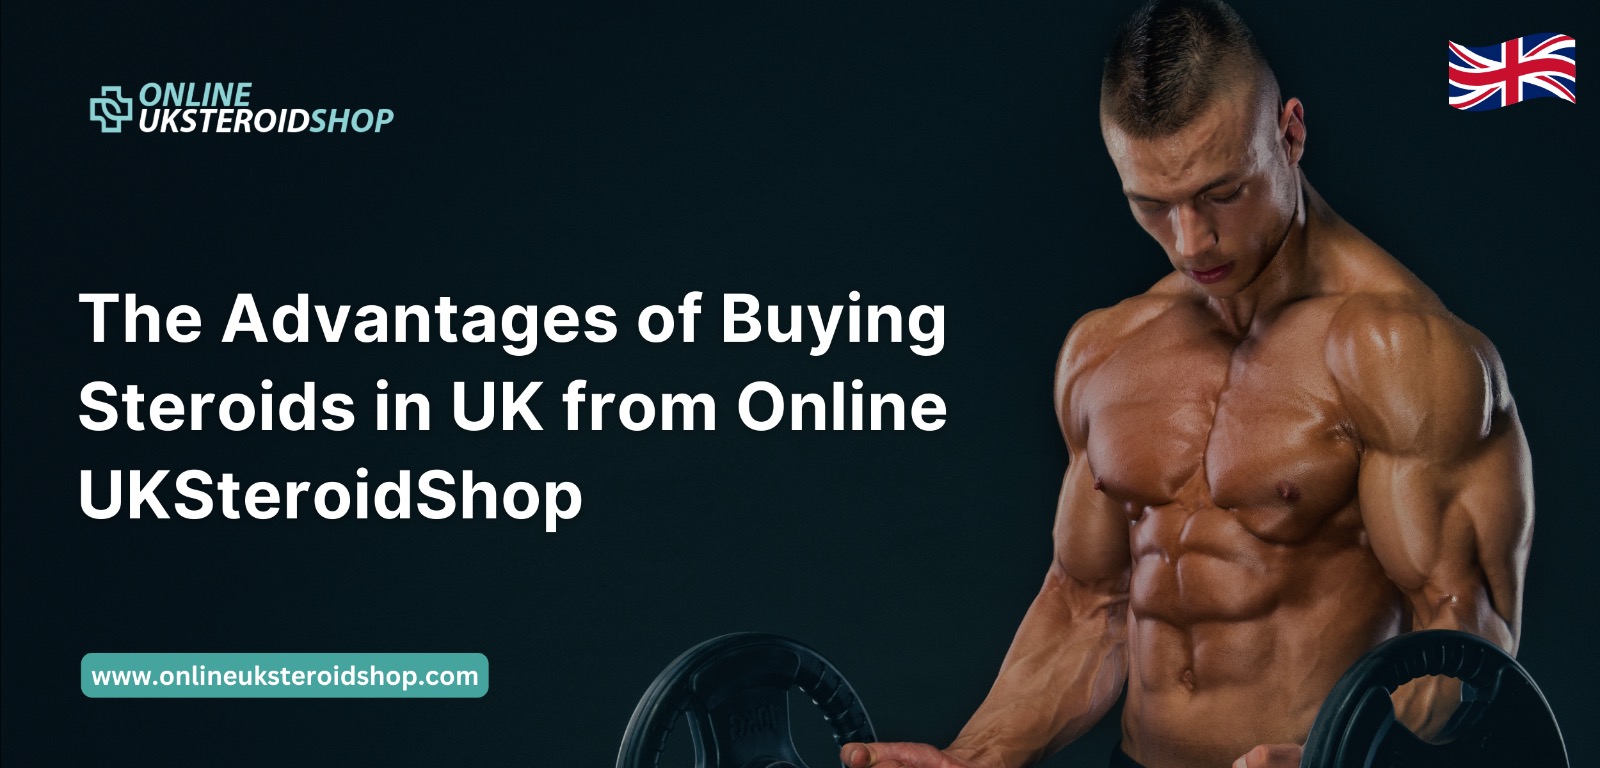 Advantages of Buying Steroids in the UK from Online UK Steroid Shop